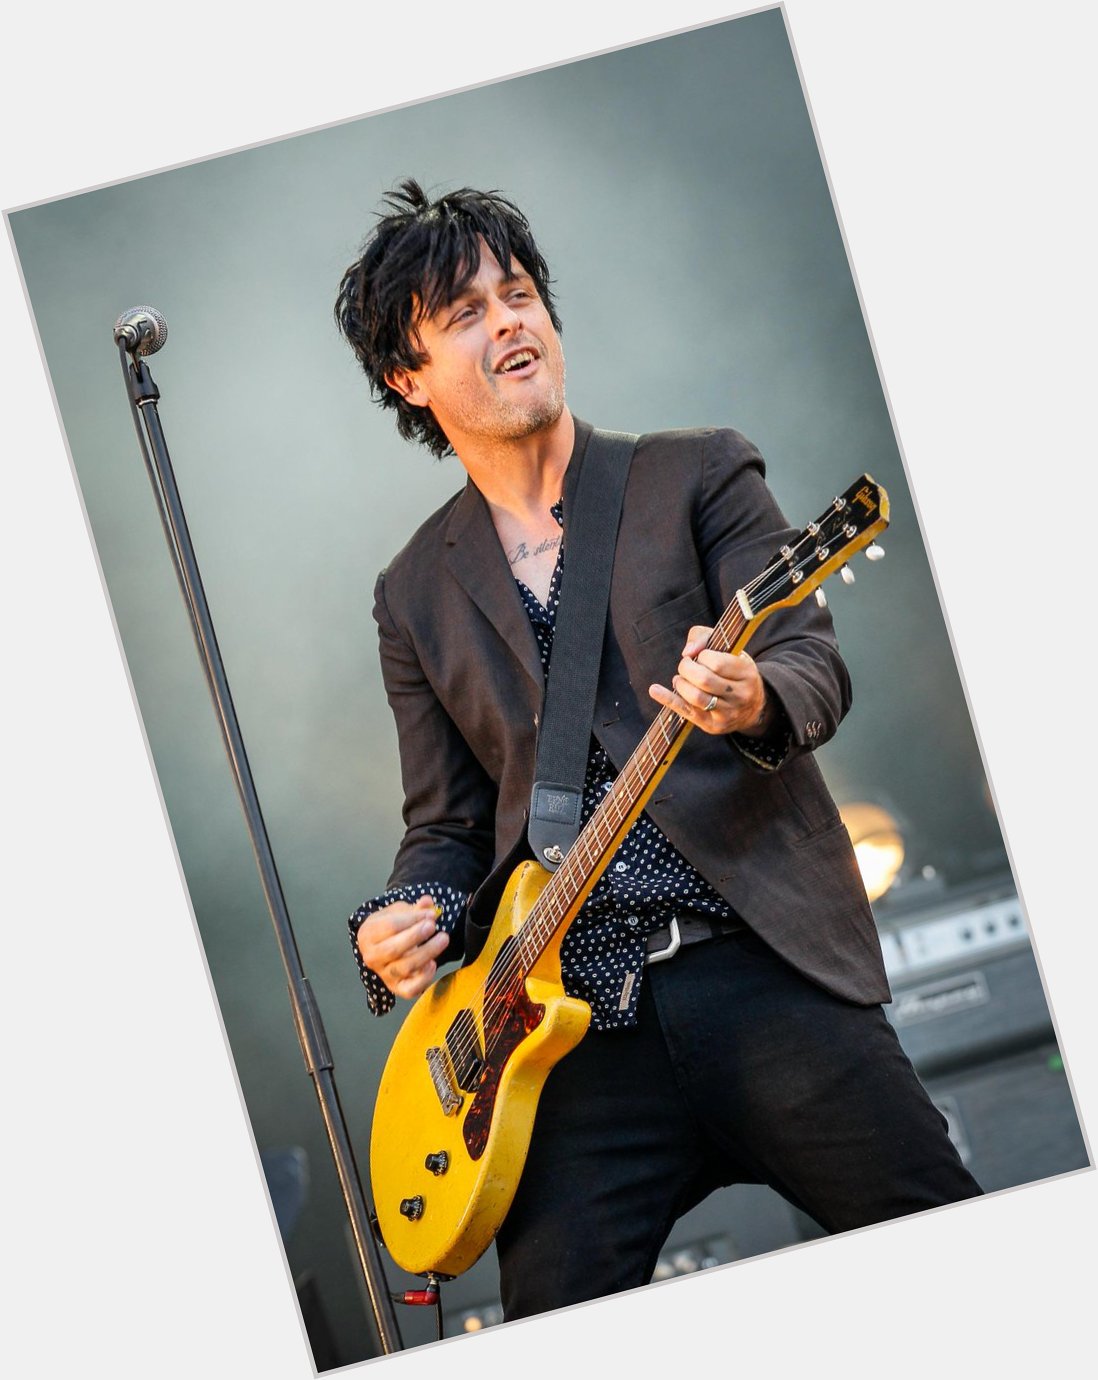 Happy 43rd Birthday to guitarist and singer who co-founded the punk band Billie Joe Armstrong! 